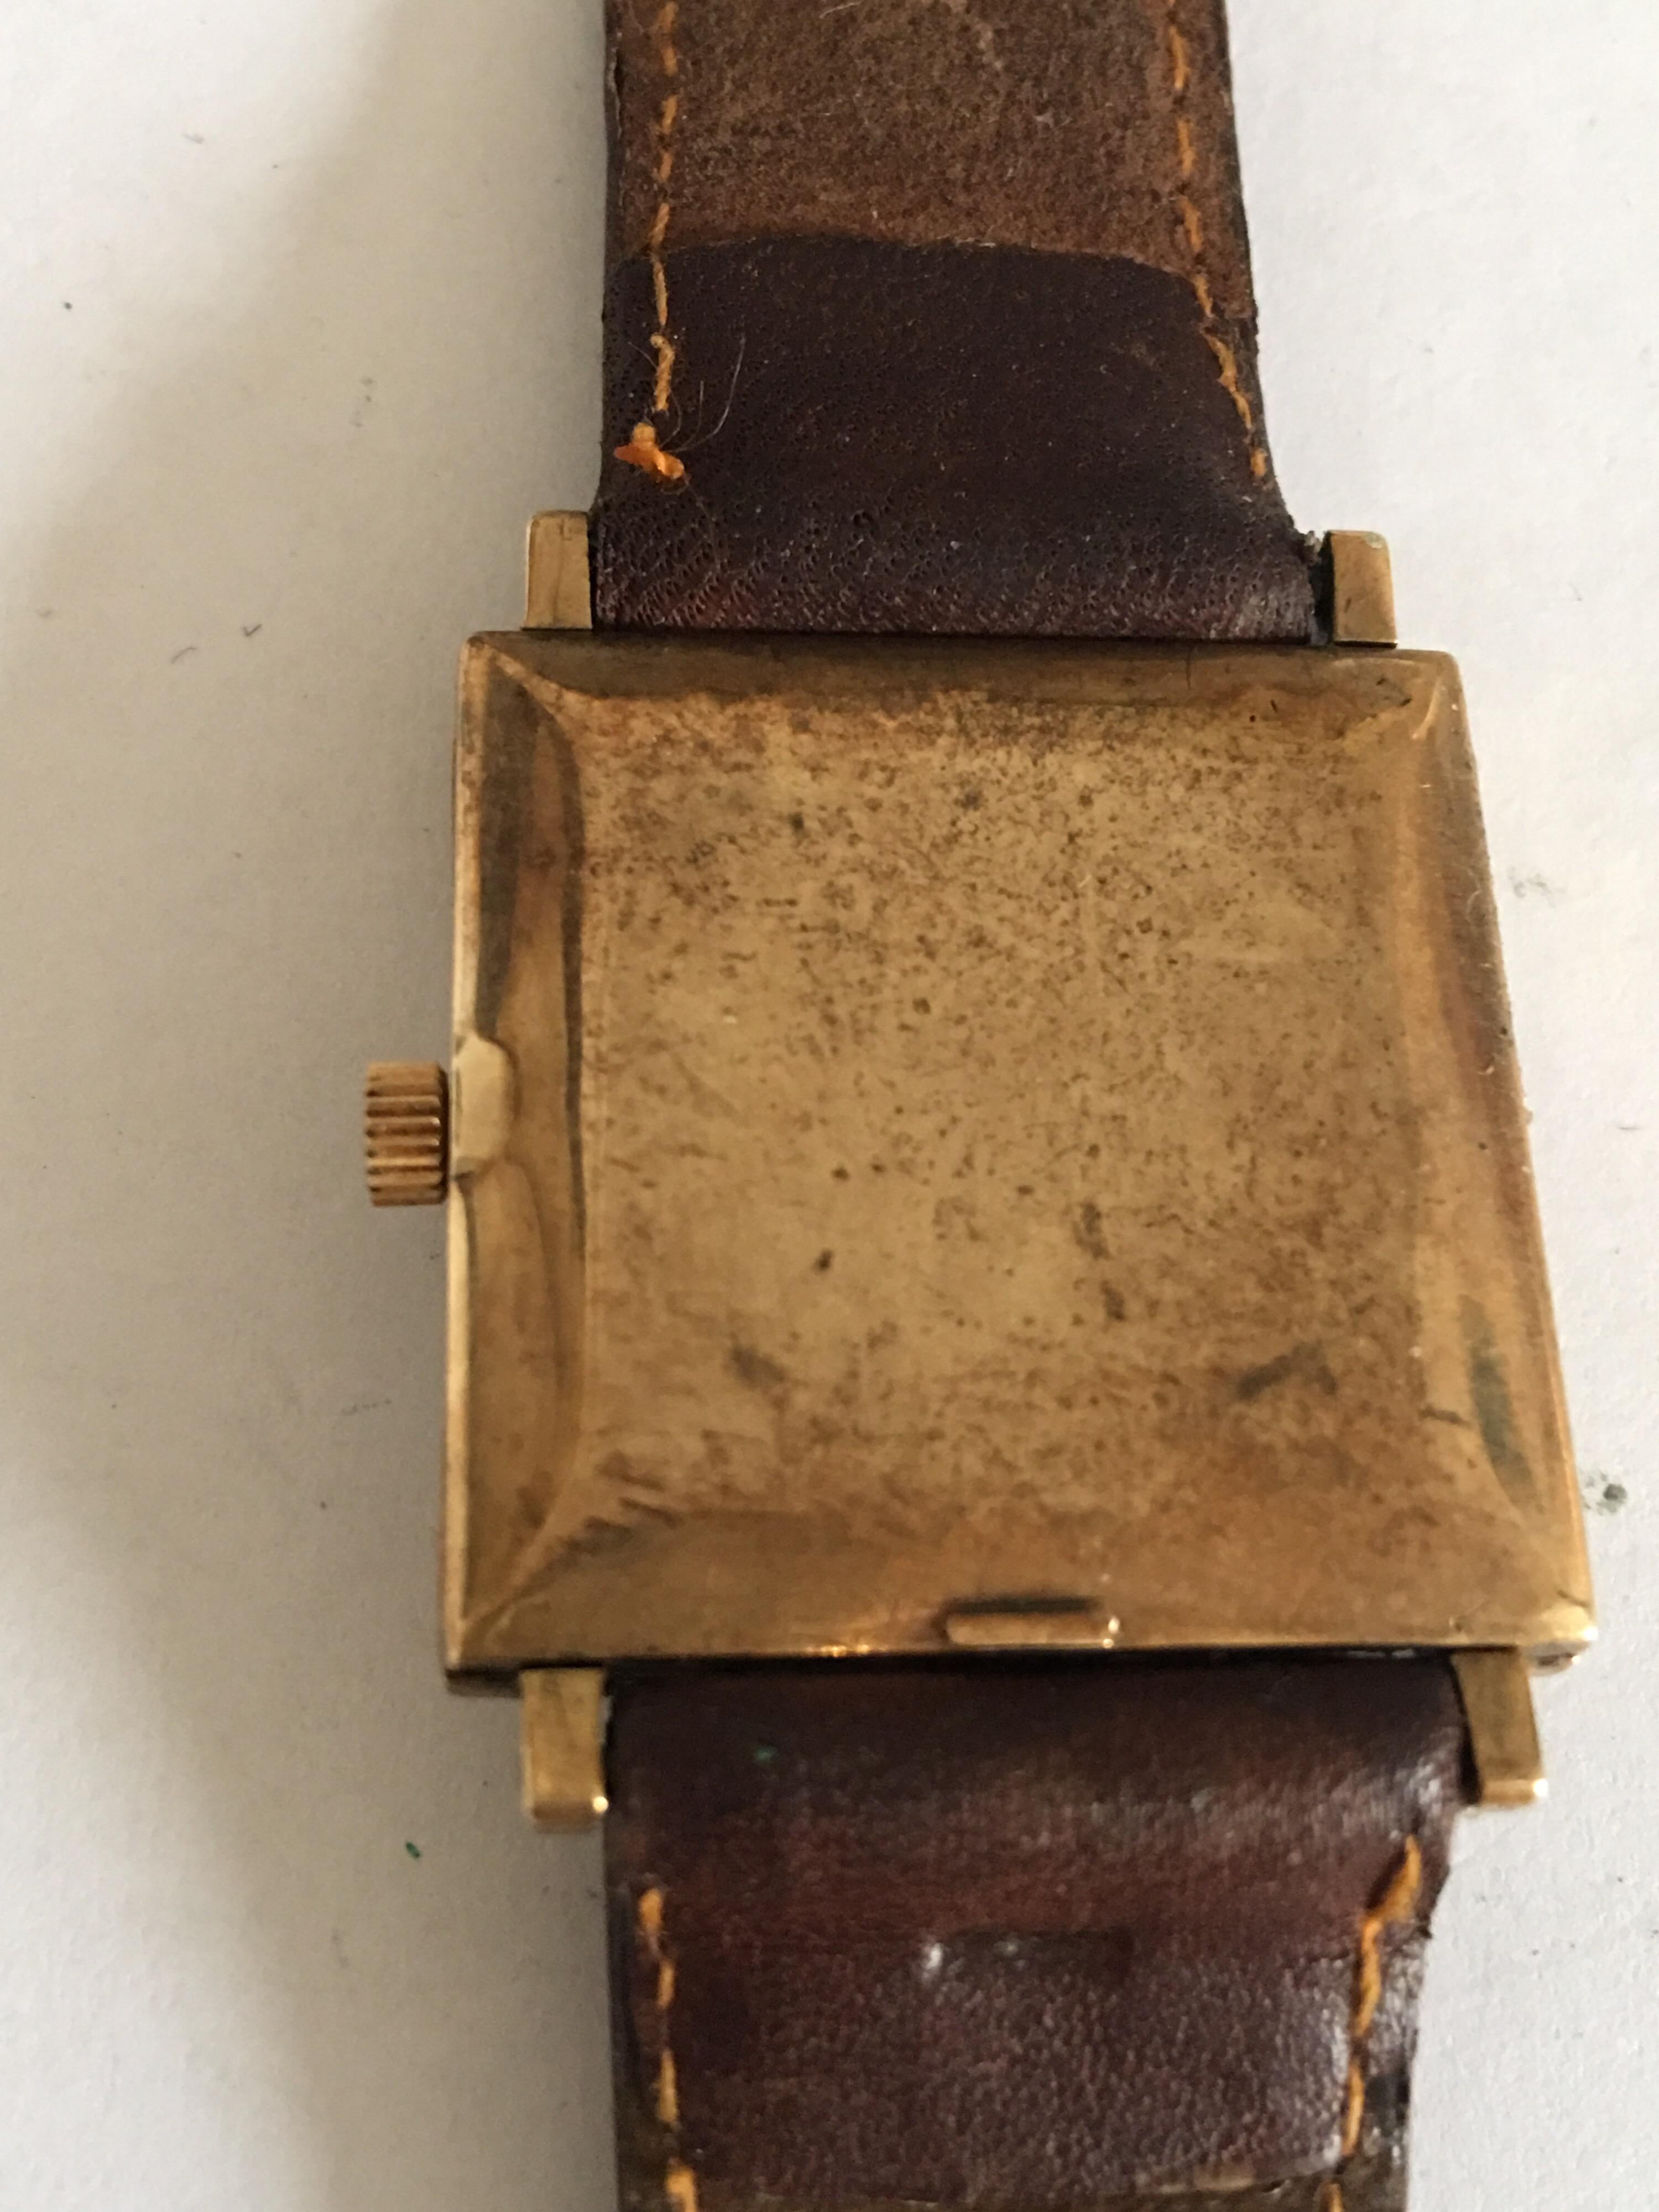 This mechanical watch is working and ticking.
Visible wear and tear on the case as shown.